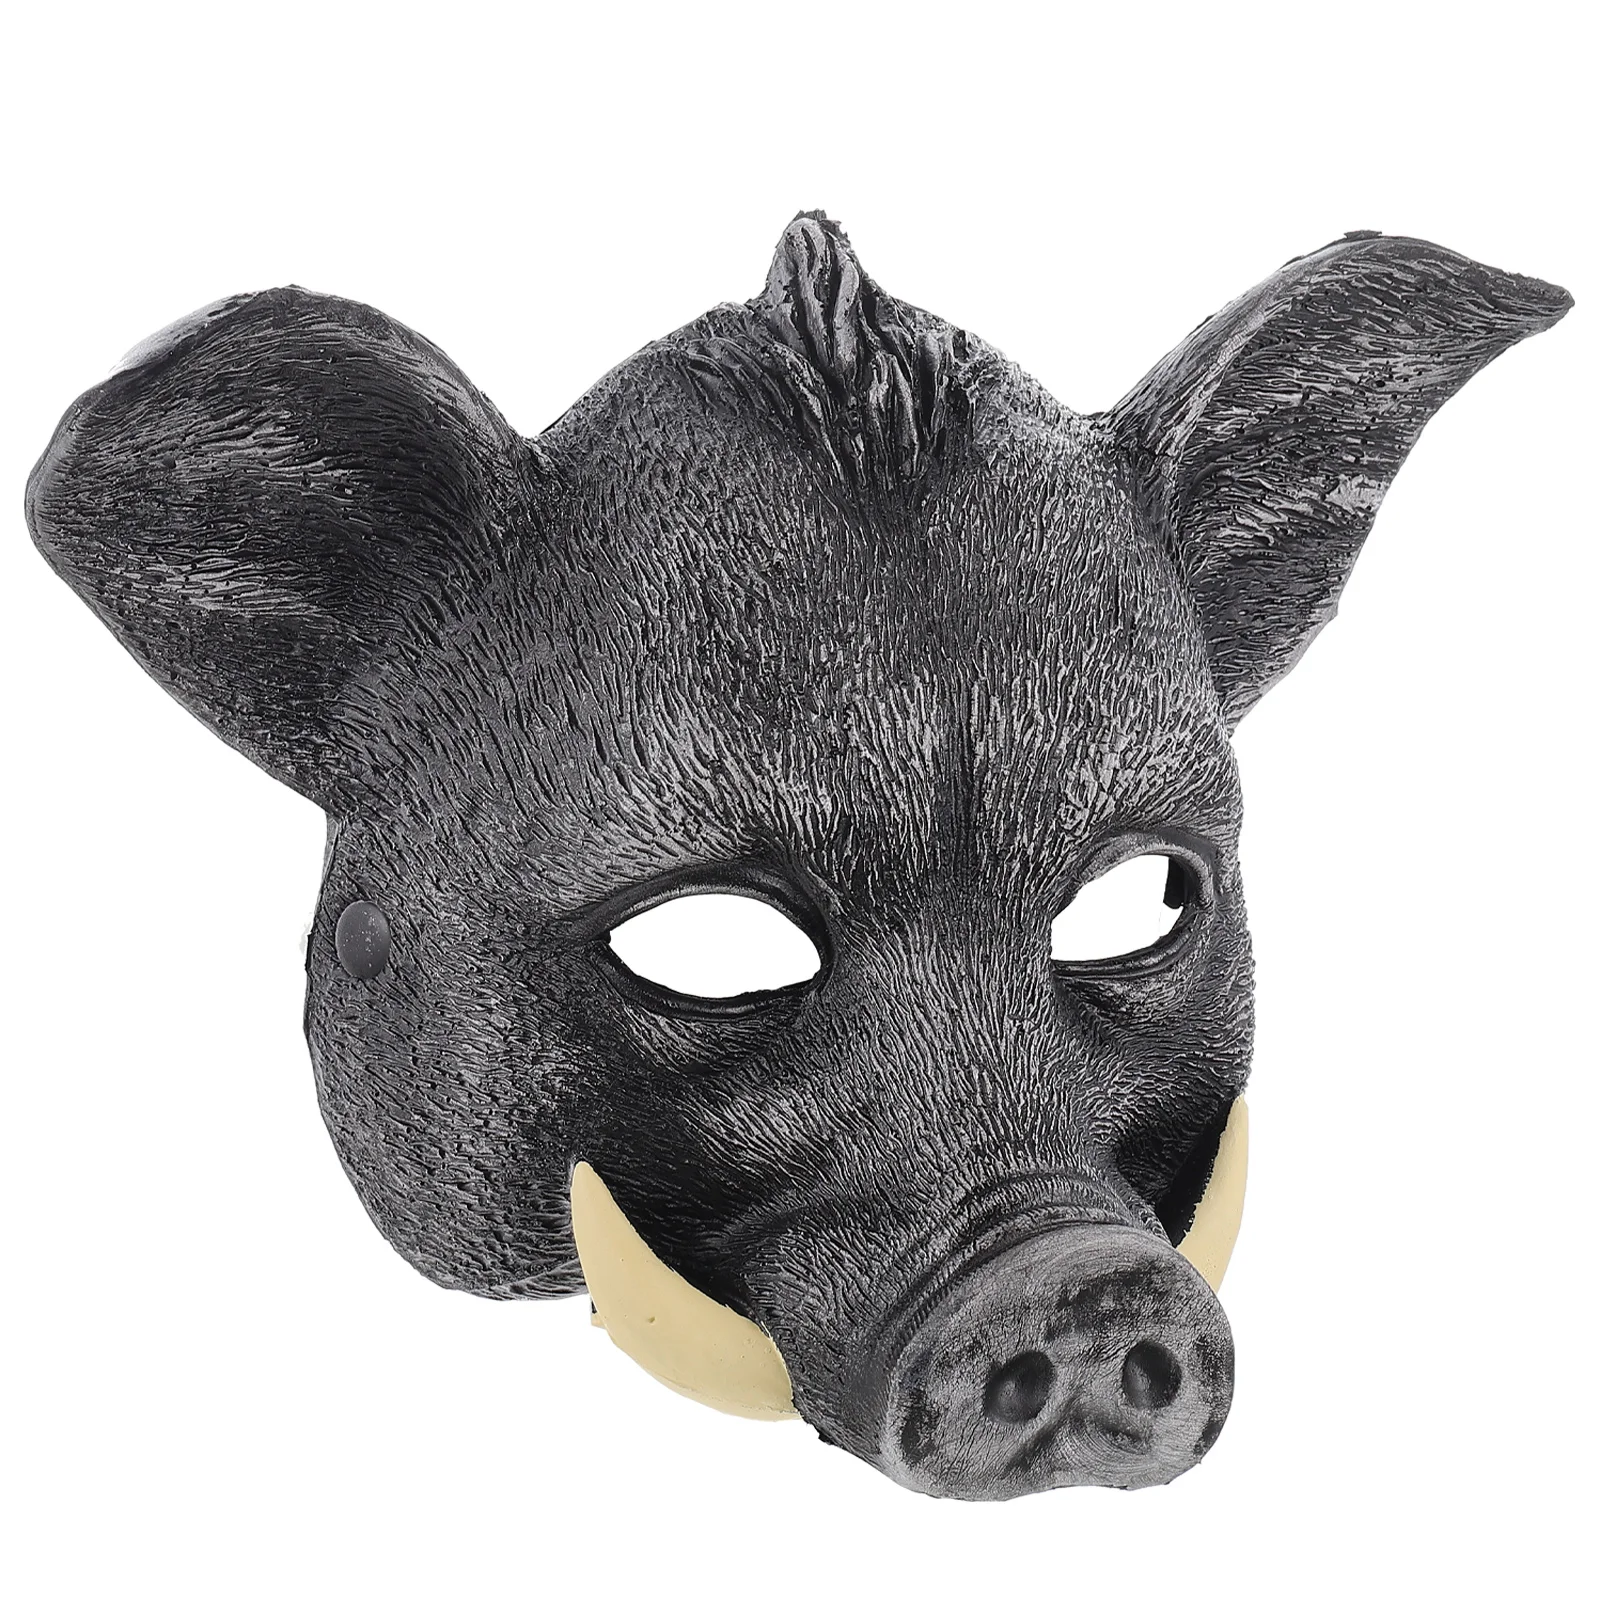 

Boar Mask Halloween Party Masquerade Photo Cosplay Prop Pu Animal Design Costume Accessory Costumes Adults